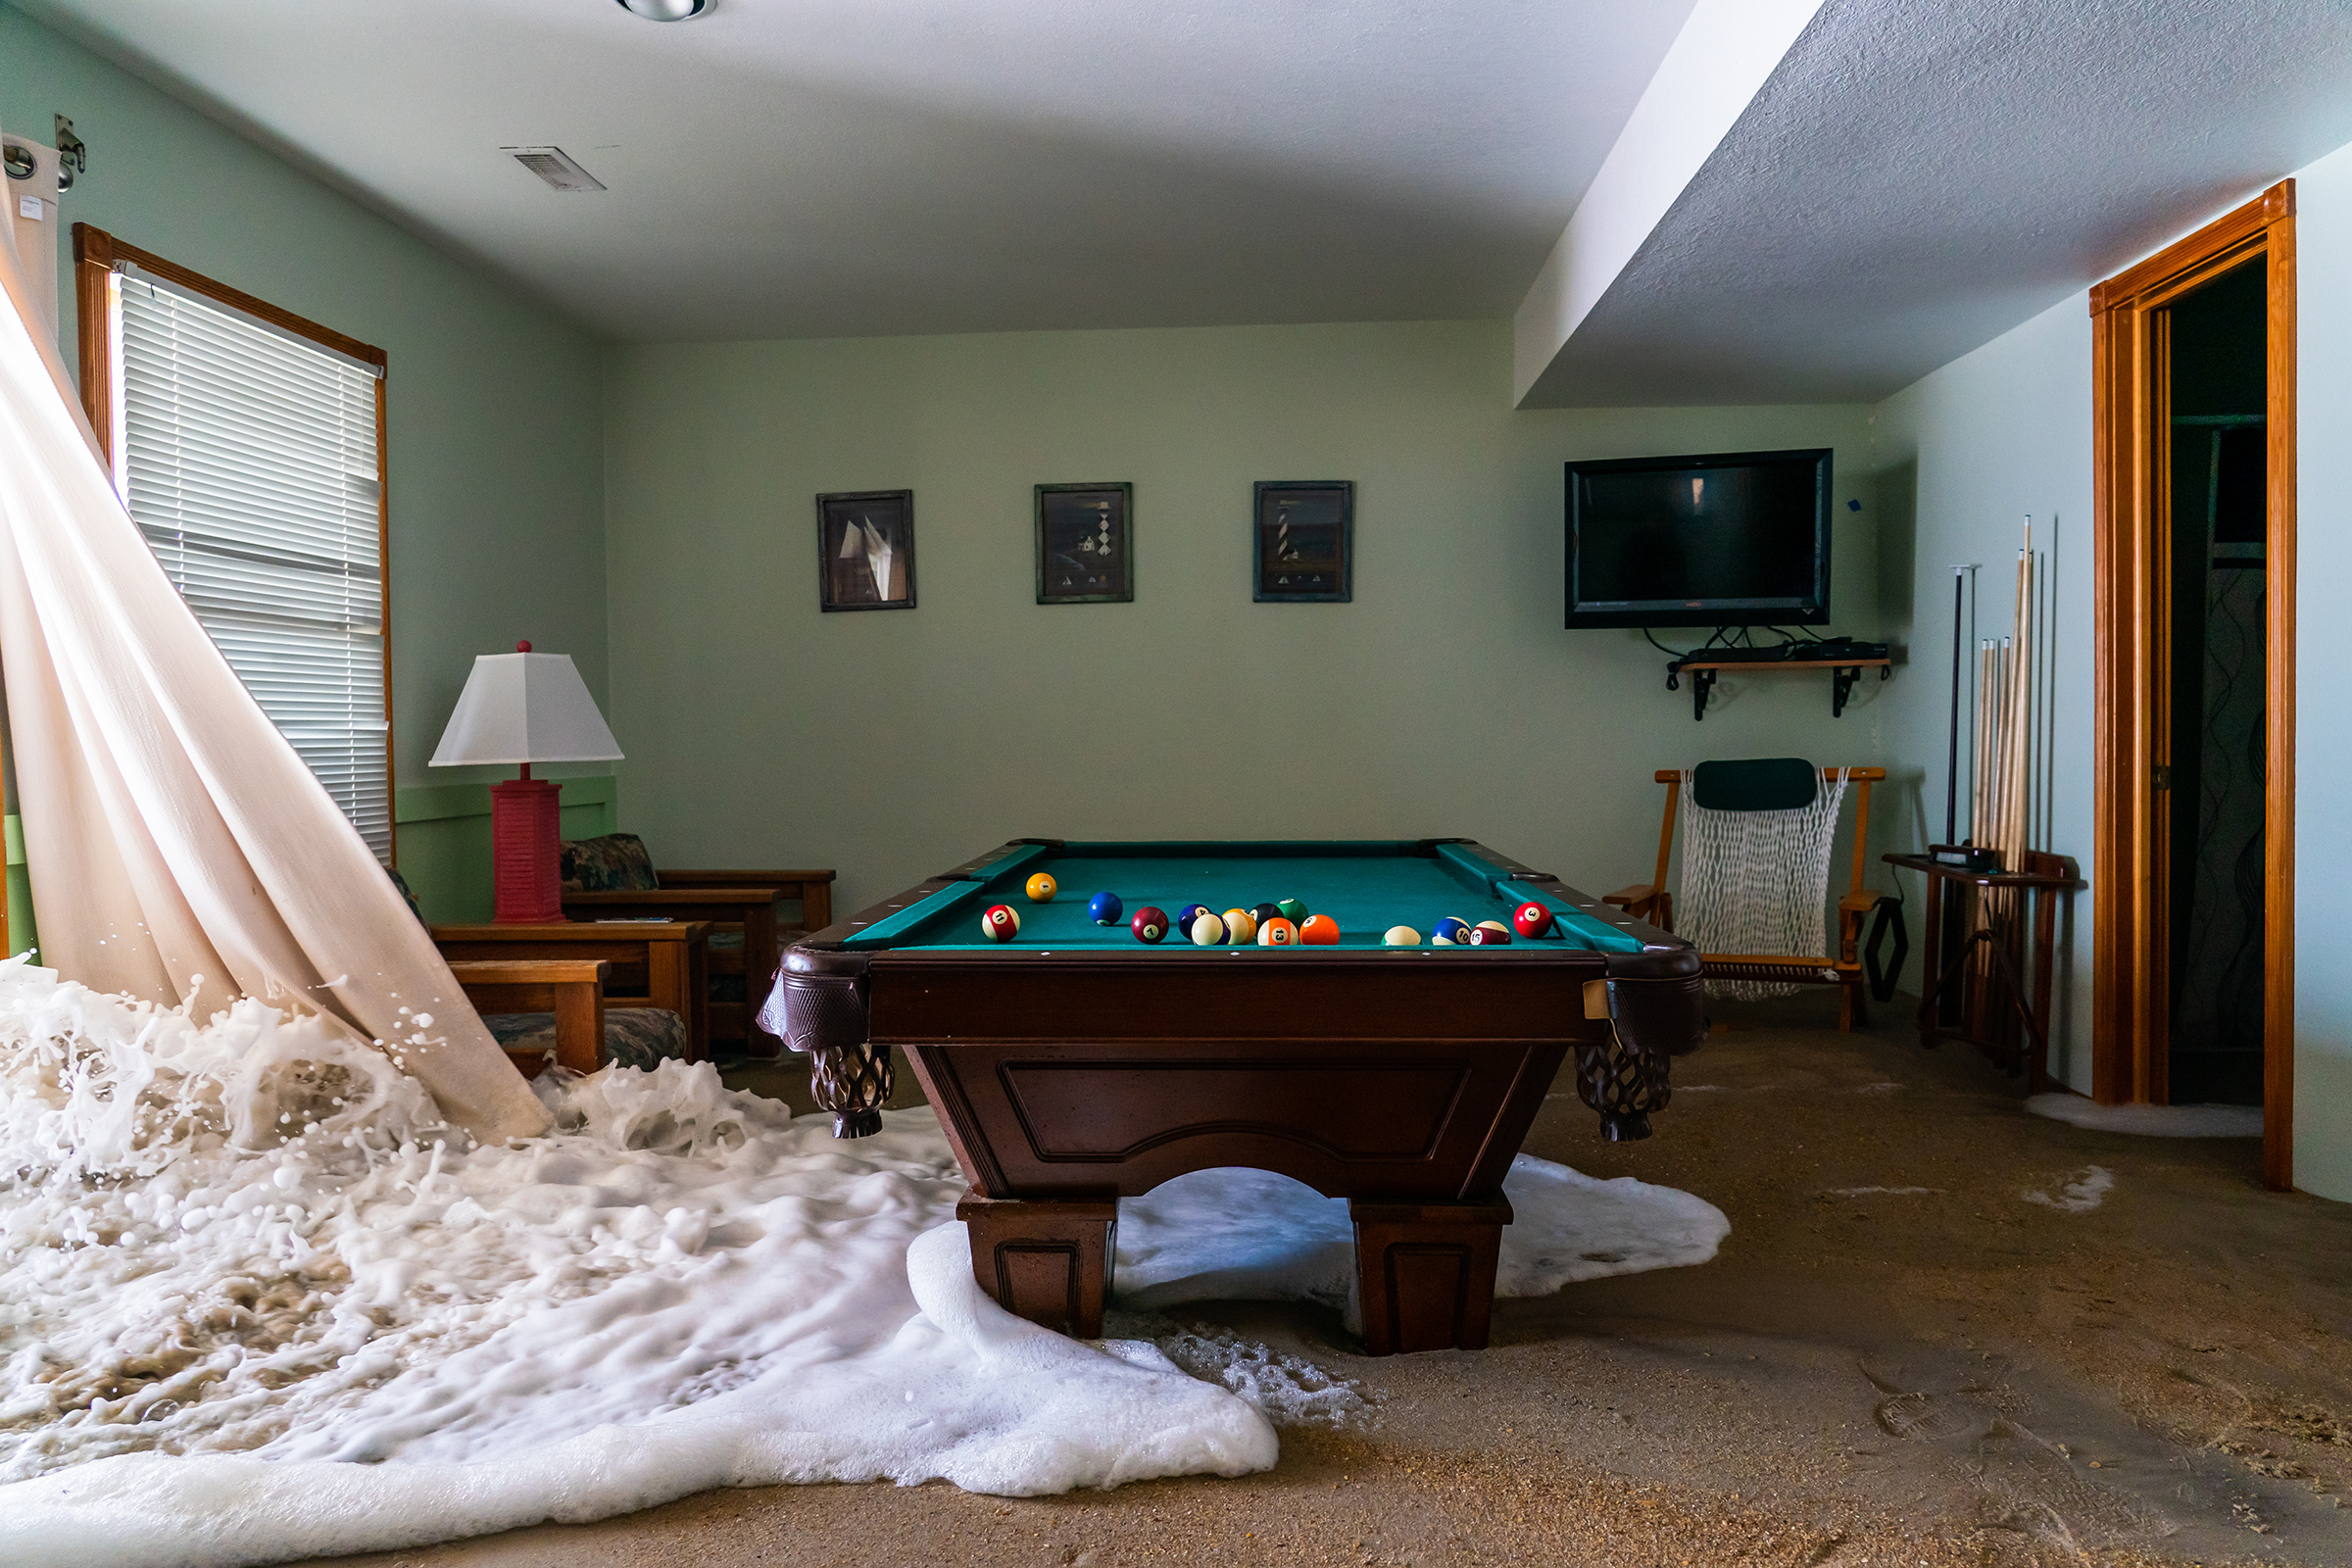 The Atlantic Ocean surges its way into a rental beach house in Avon, N.C., on Sept. 22. Hurricane Teddy was spinning just off the coast, causing higher than normal tides and tidal surges that were inundating lower-lying homes and rental properties.